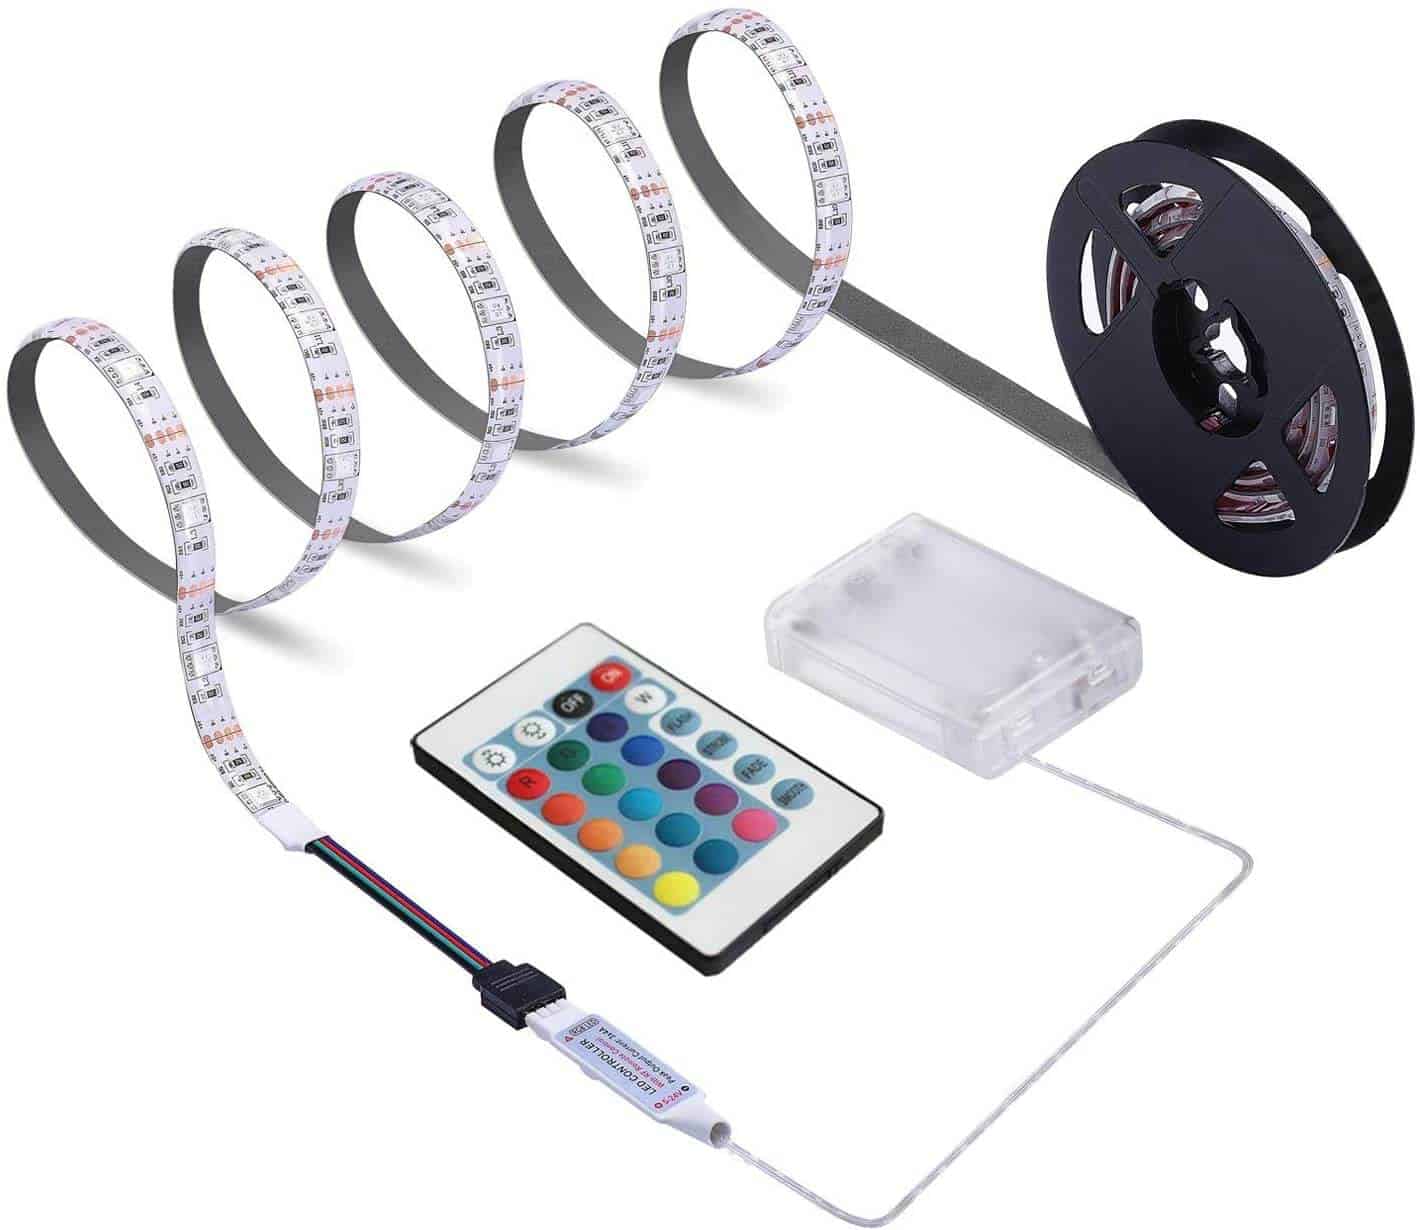 How to cut, connect & power LED Strip Lighting 